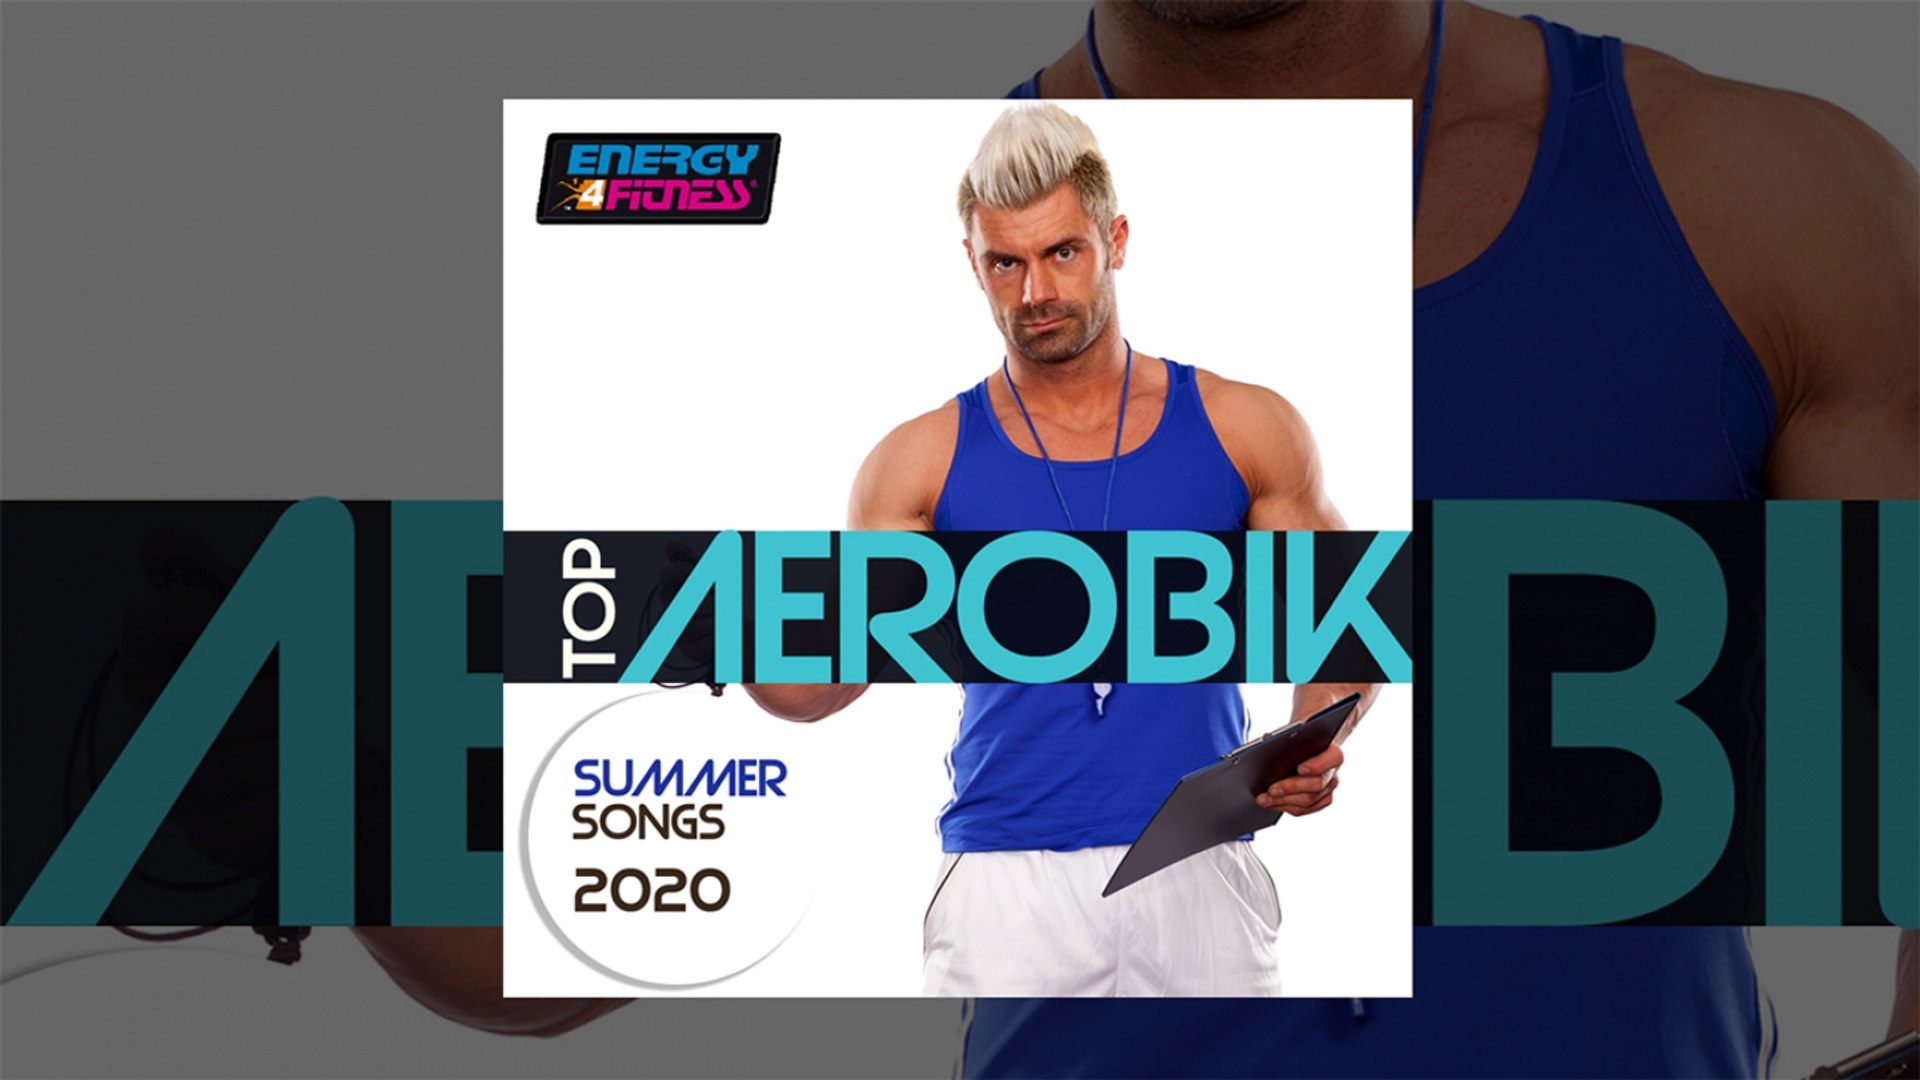 E4F - Top Aerobic Summer Songs 2020 - Fitness & Music 2020